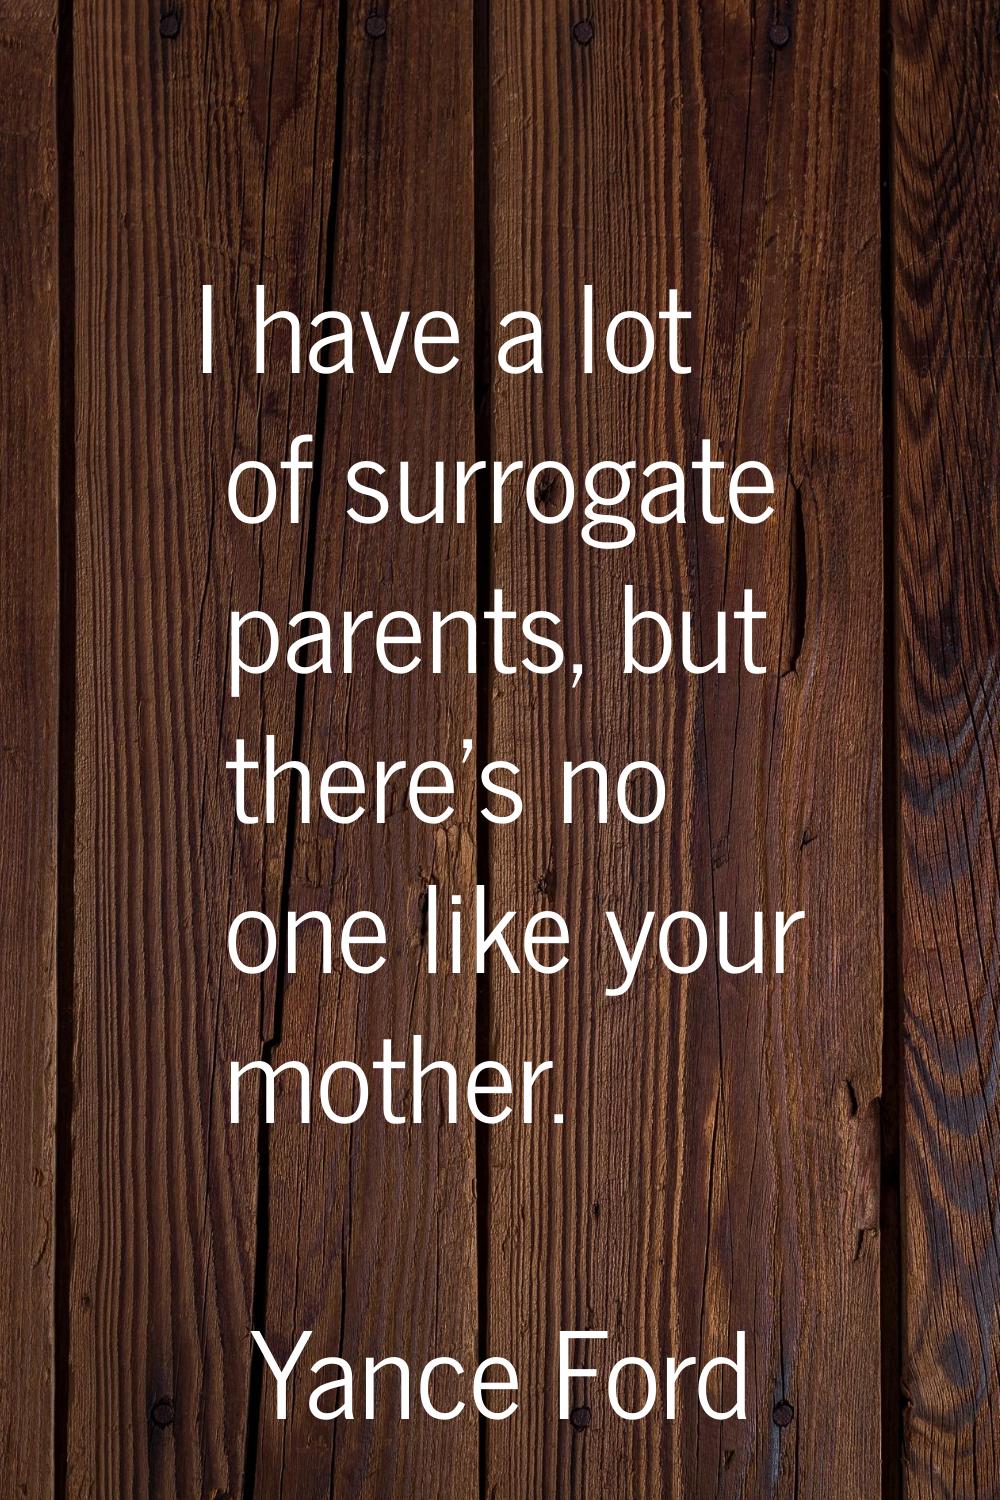 I have a lot of surrogate parents, but there's no one like your mother.